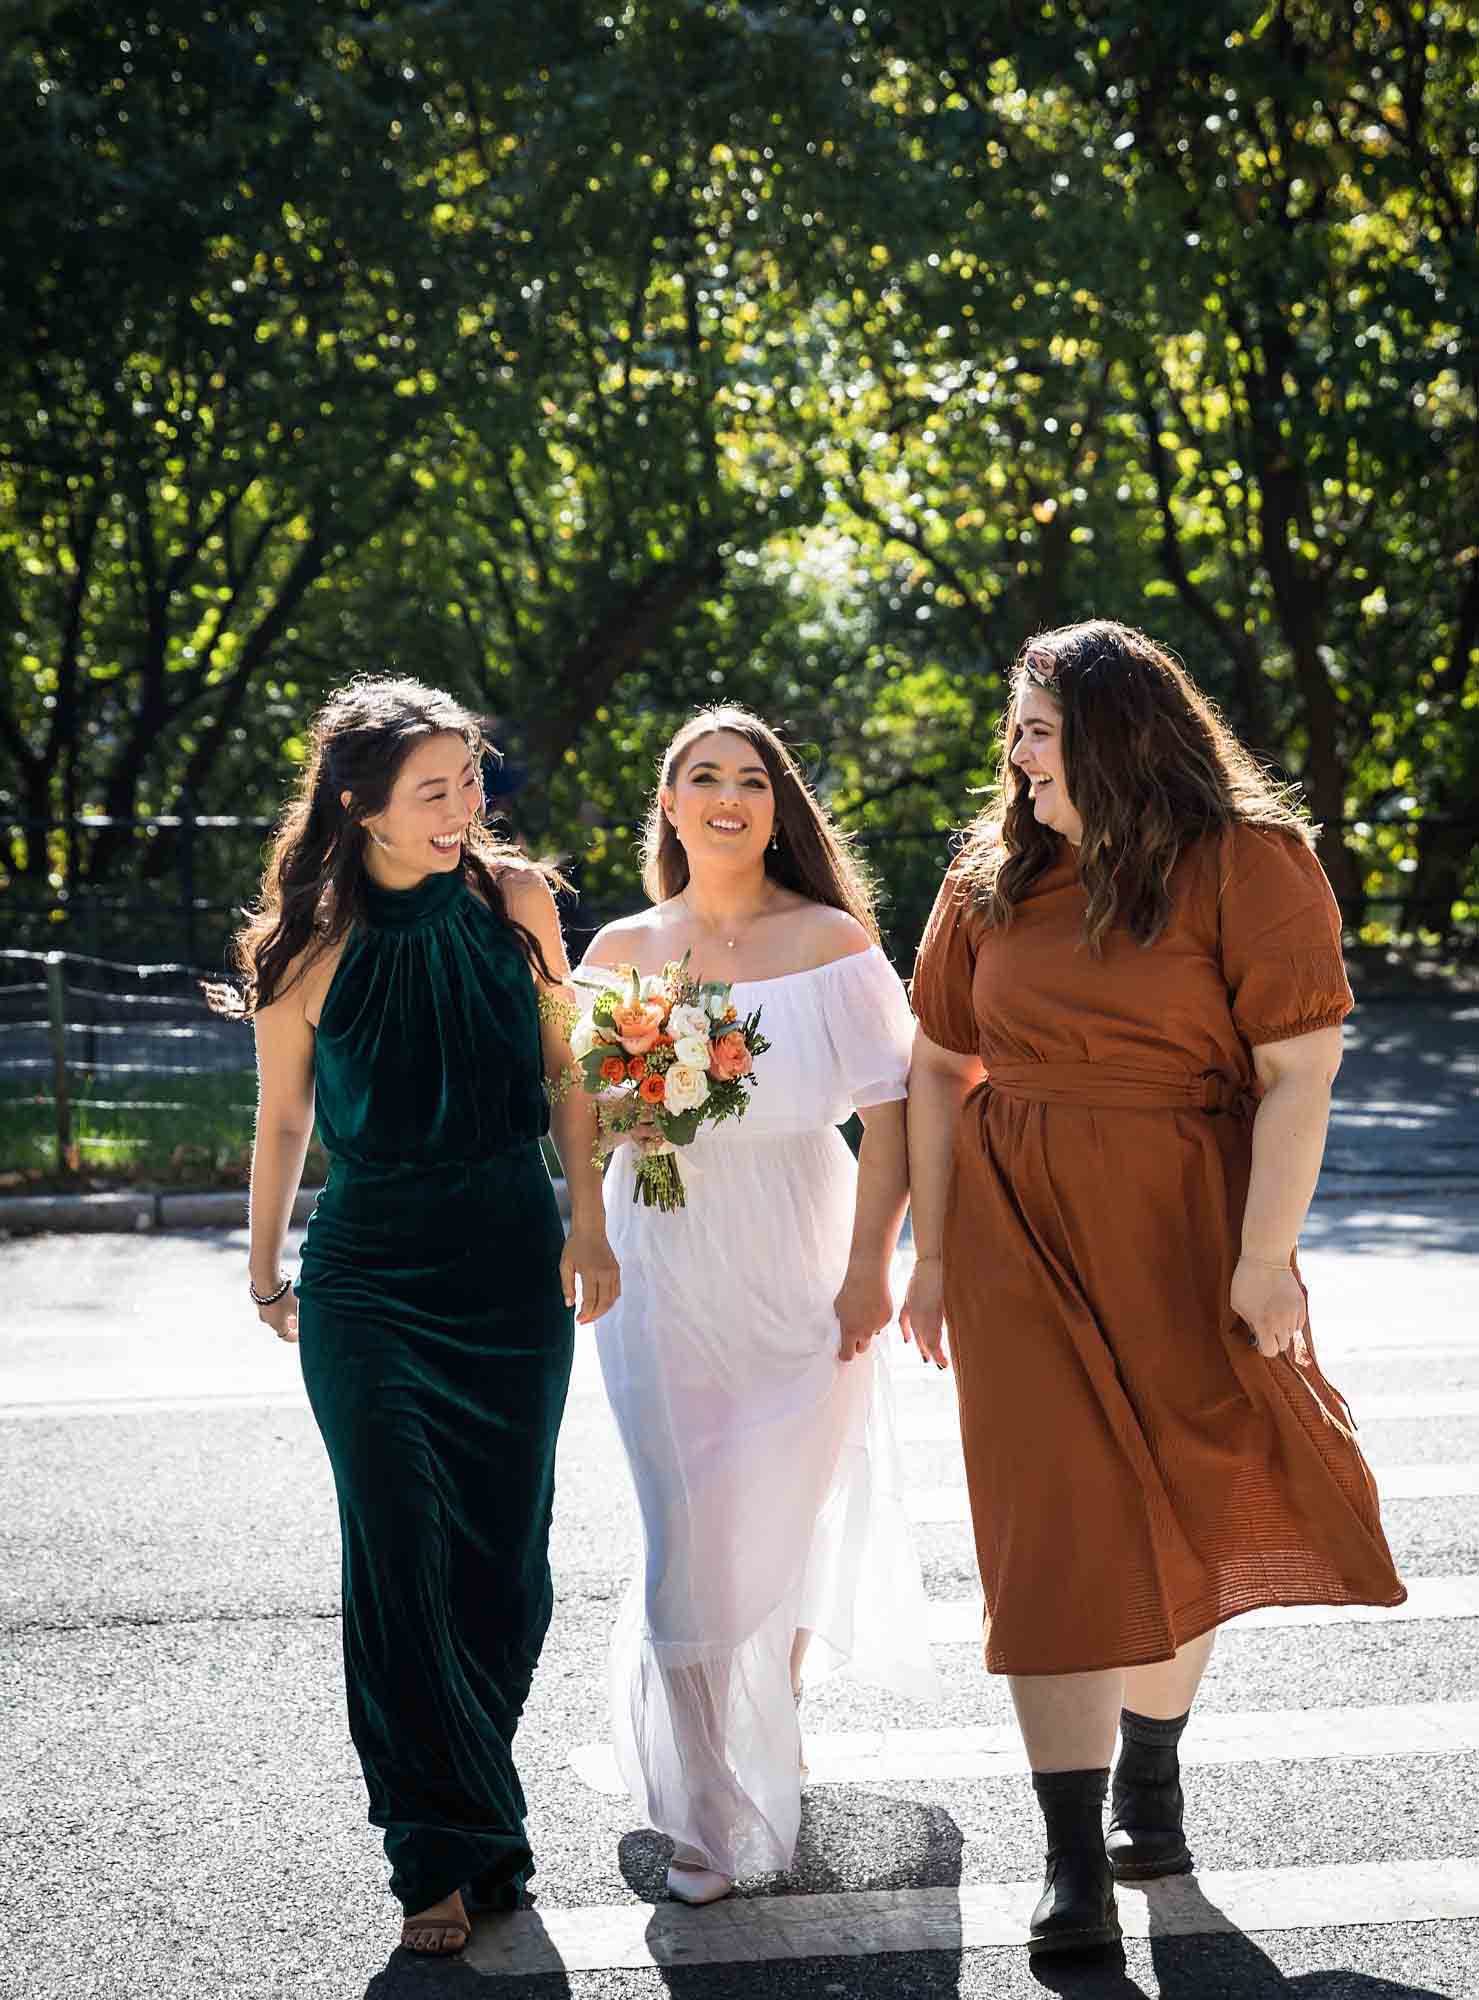 Bride walking between two female friends Article on how to elope in Central Park by NYC wedding photojournalist, Kelly Williams. Includes photos from a real wedding near Bow Bridge.